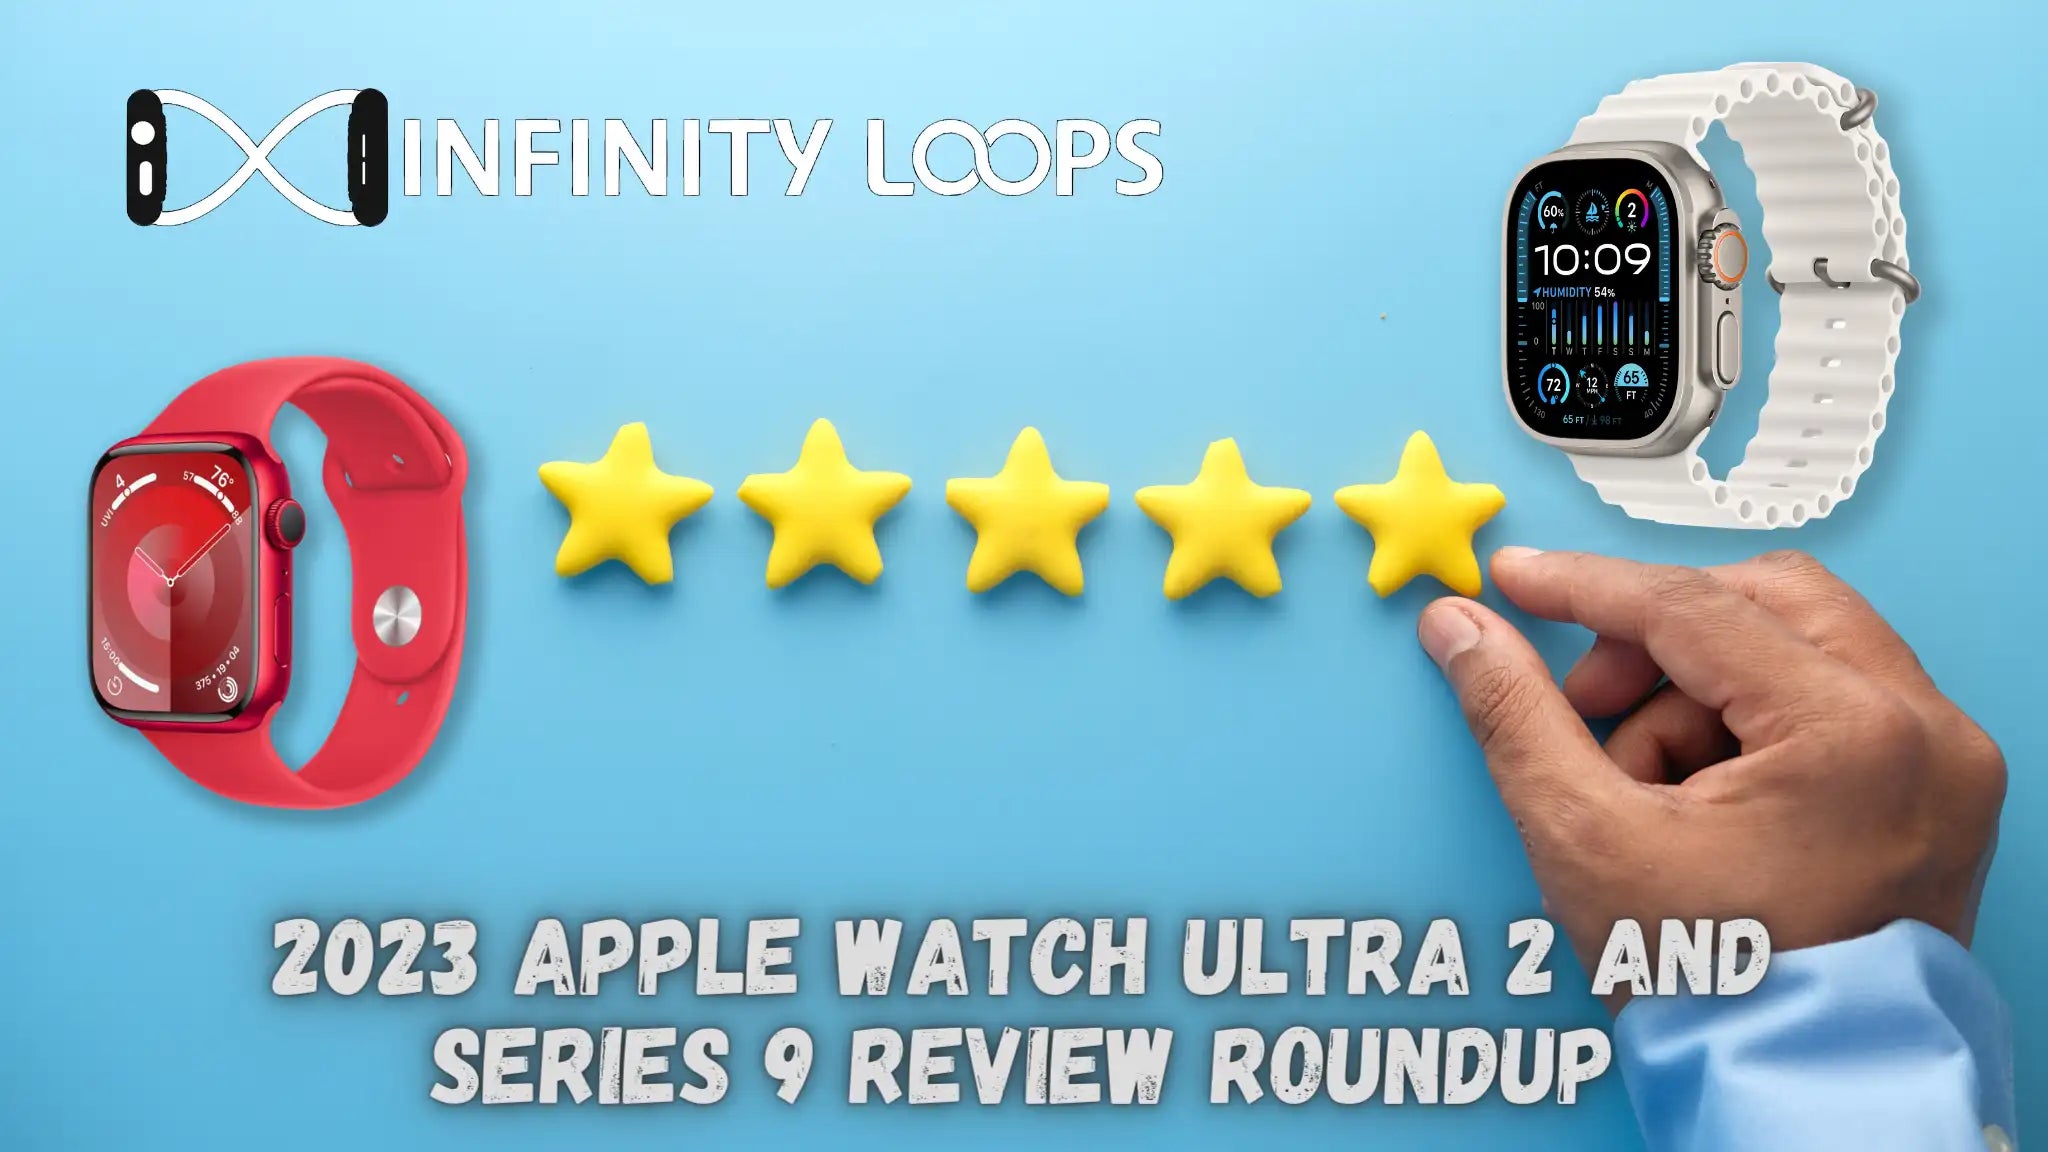 2023 Apple Watch Ultra 2 and Series 9 Review Roundup